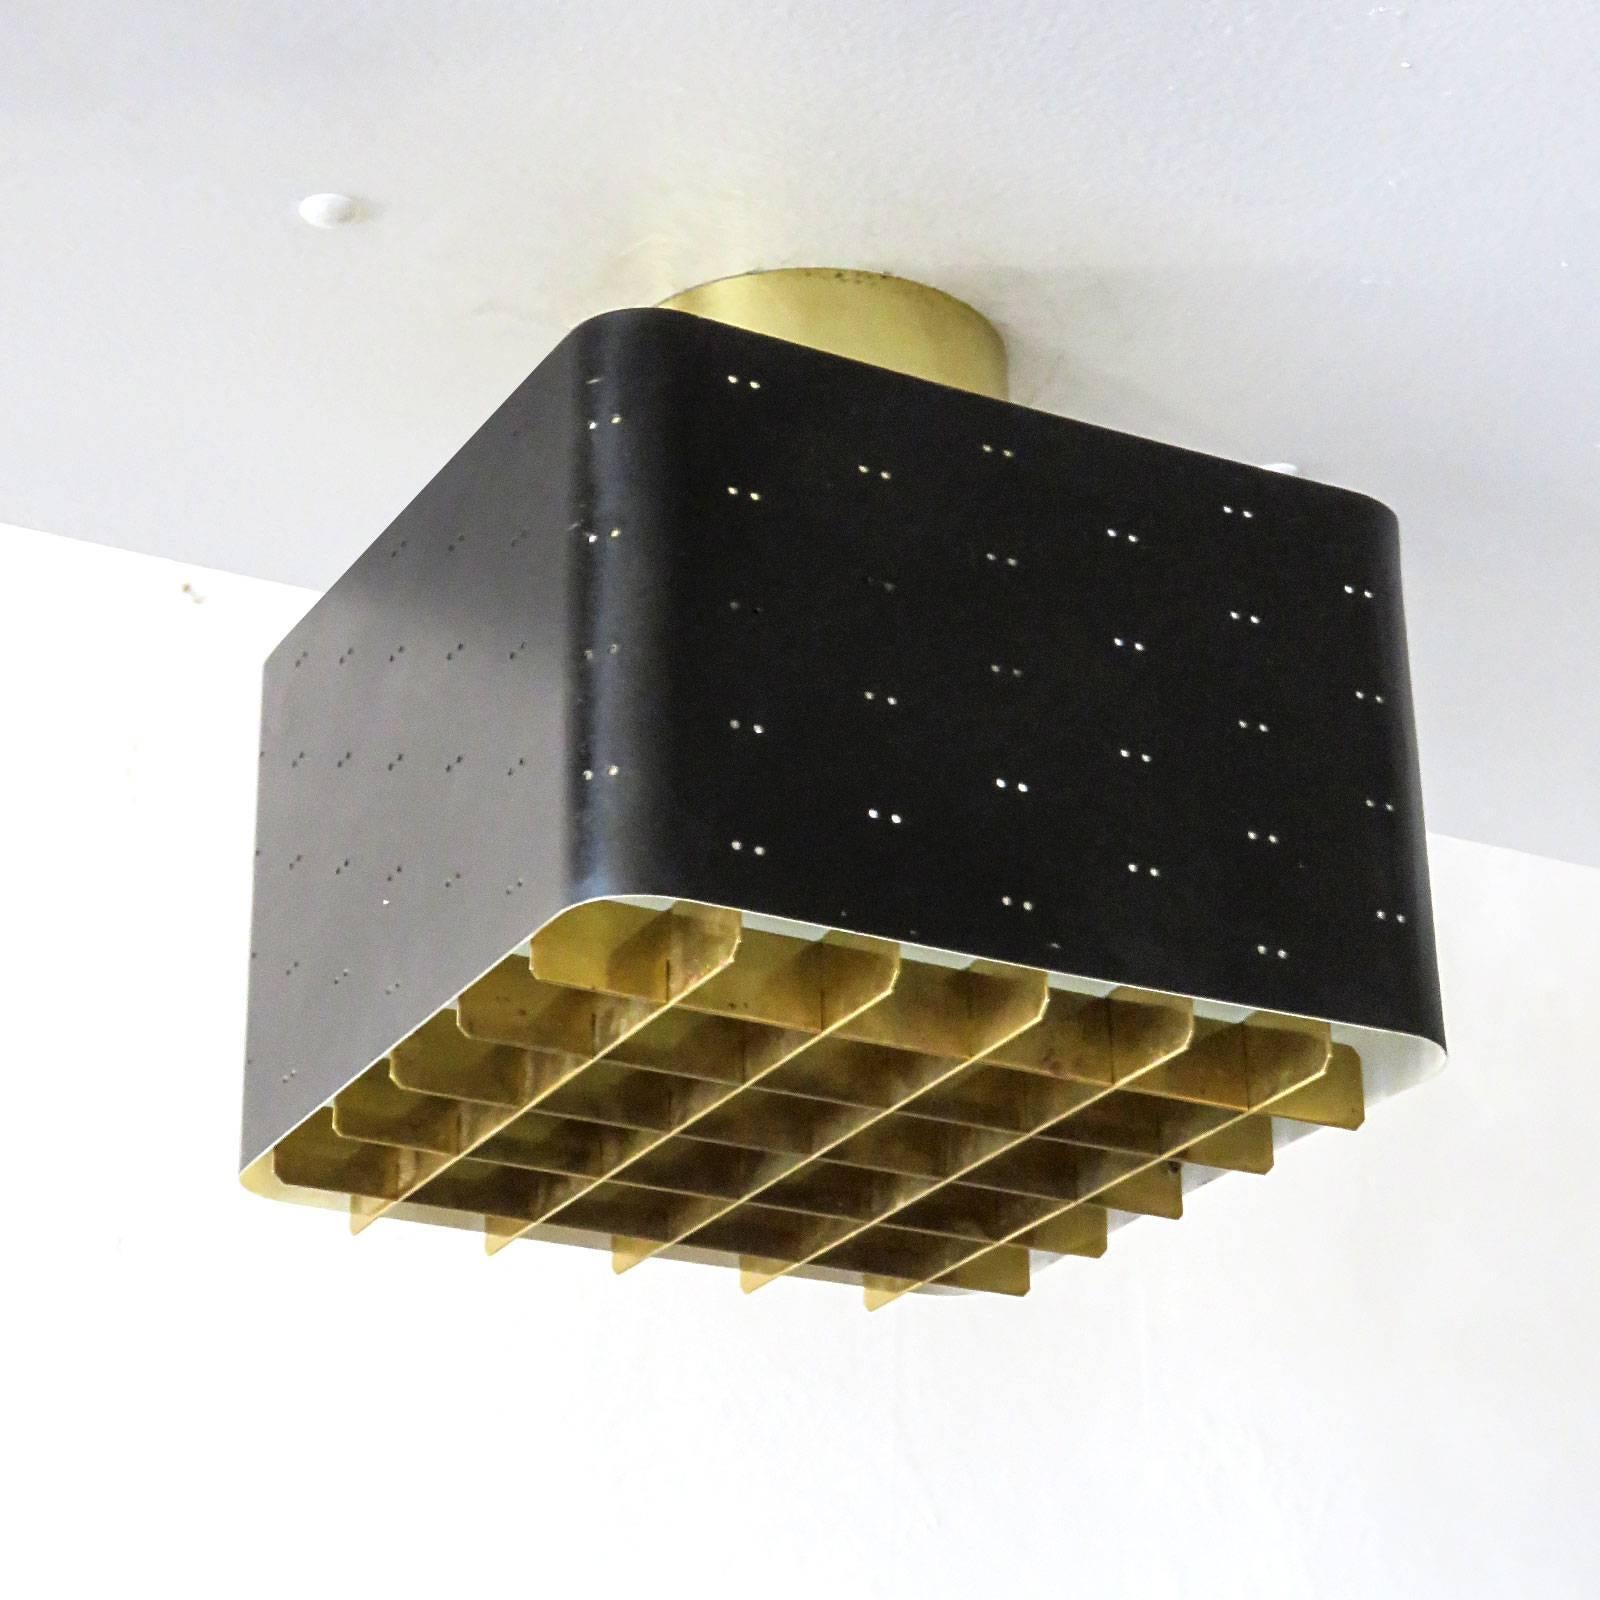 Stunning flush mount ceiling light, Model 9068, by Paavo Tynell for Idman, Helsinki, Finland, circa 1955, in brass and perforated enameled metal with frosted glass diffuser, stamped with manufacturer's label. Literature: Idman Oy catalog